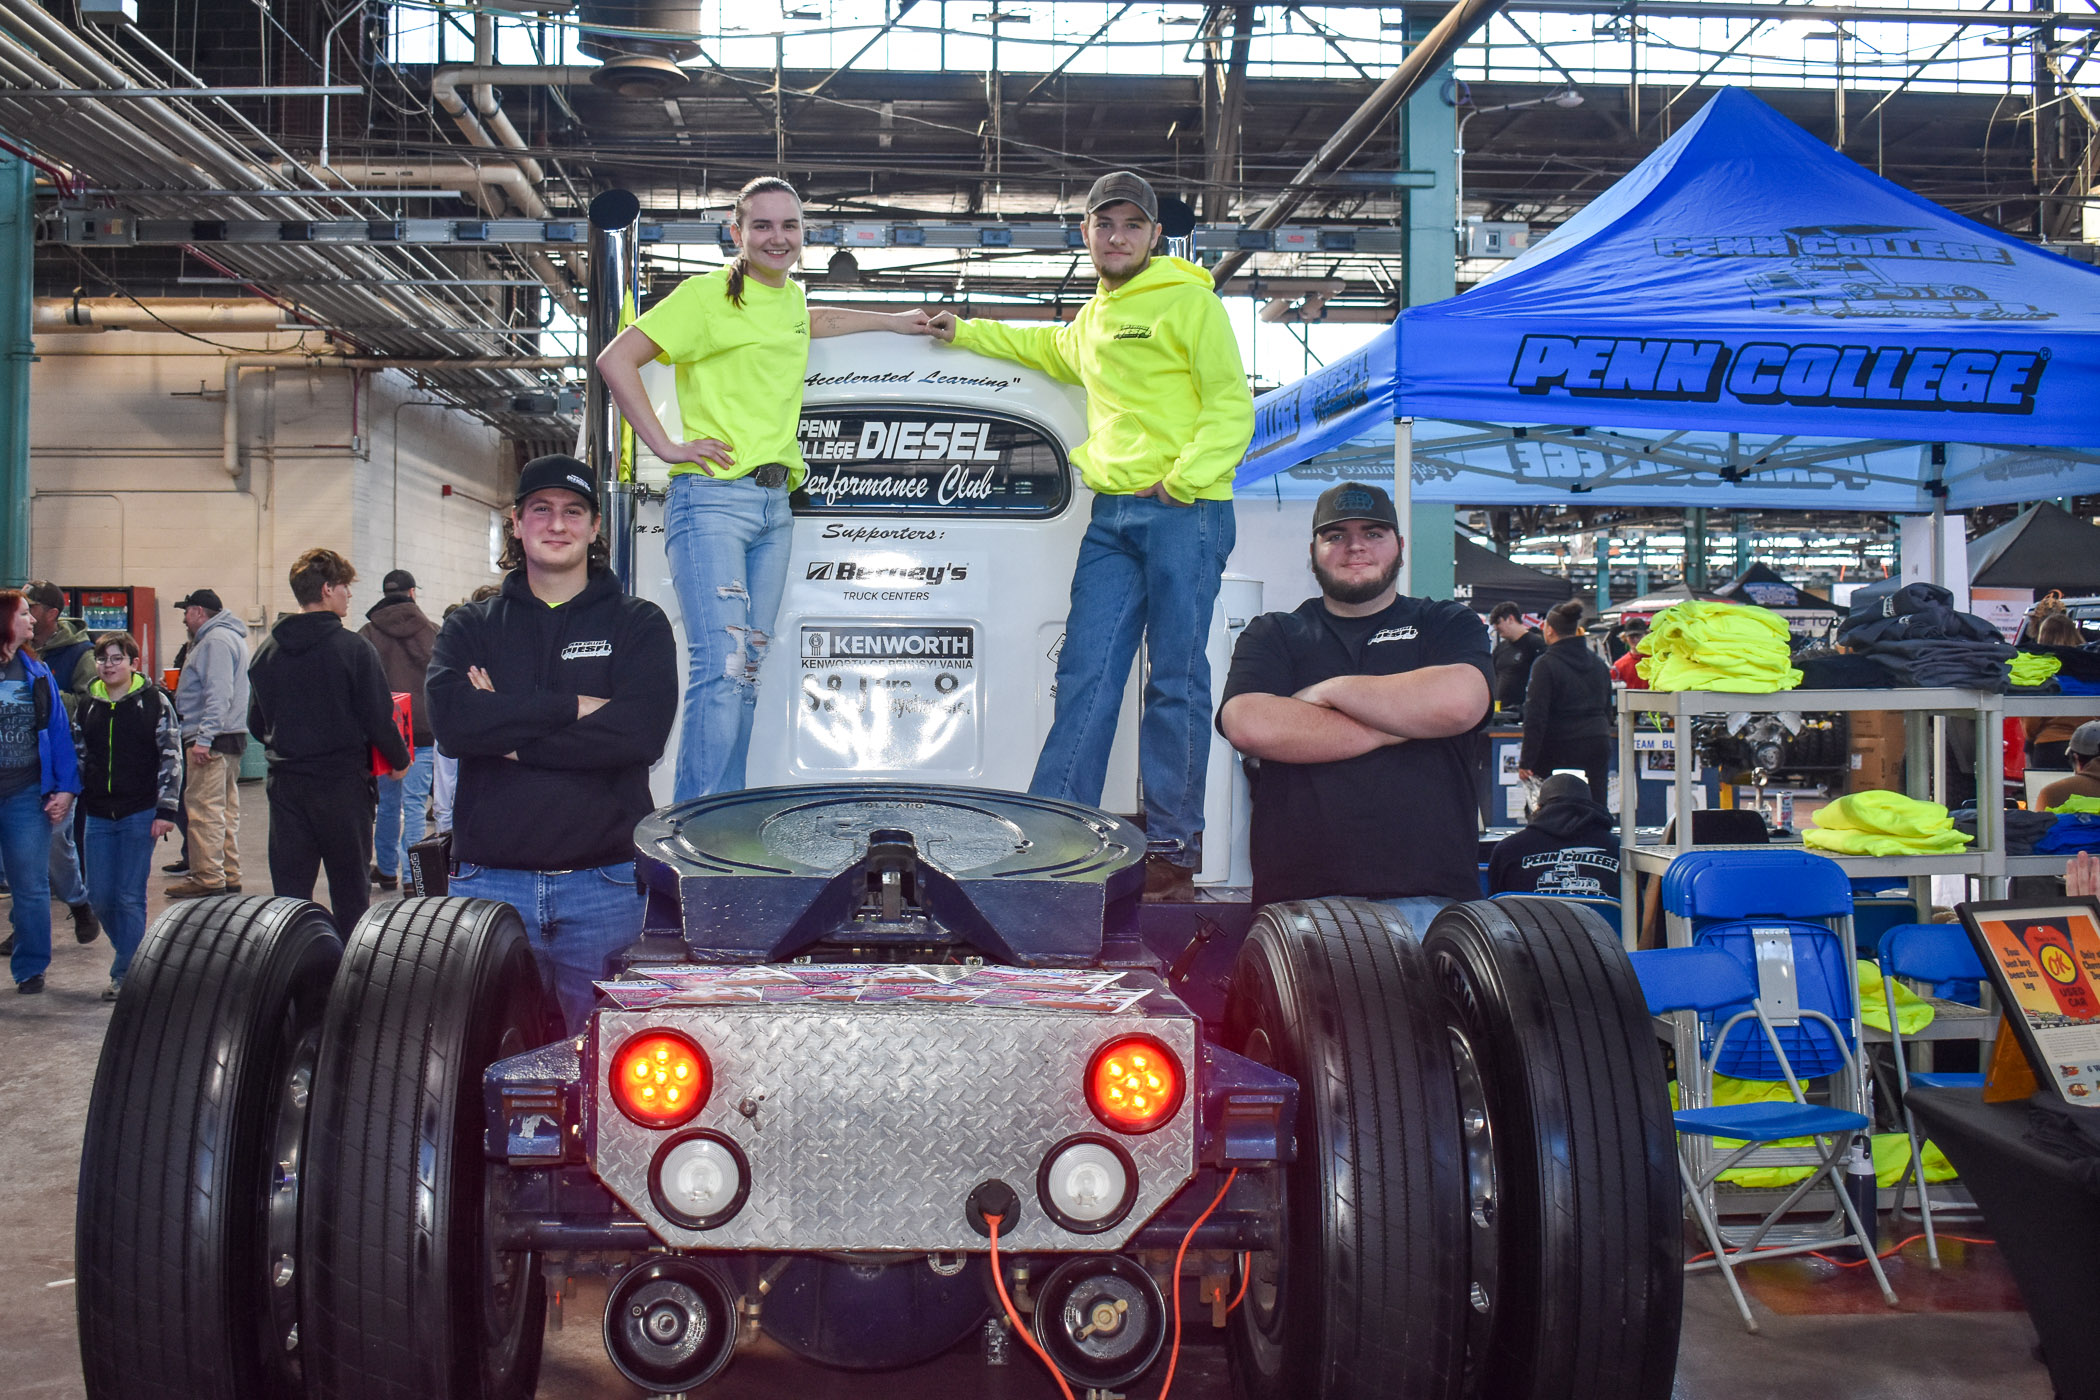 Diesel students revved up to recruit at Motorama